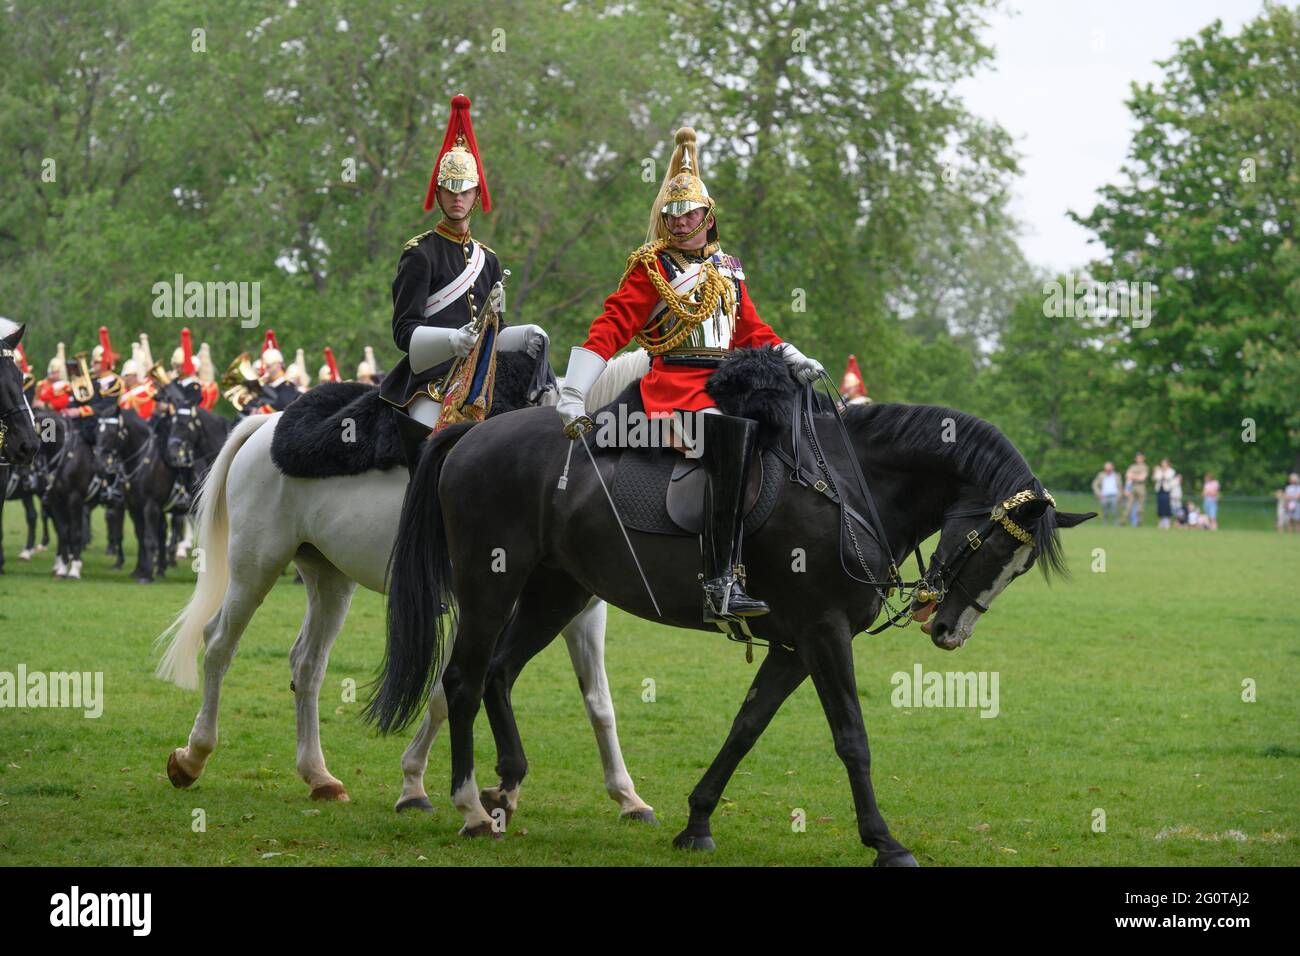 London, UK. 3 June 2021. 2021 Annual inspection of the Household Cavalry at Hyde Park by Major General Christopher John Ghika CBE the General Officer Commanding. Credit: Malcolm Park/Alamy Live News. Stock Photo